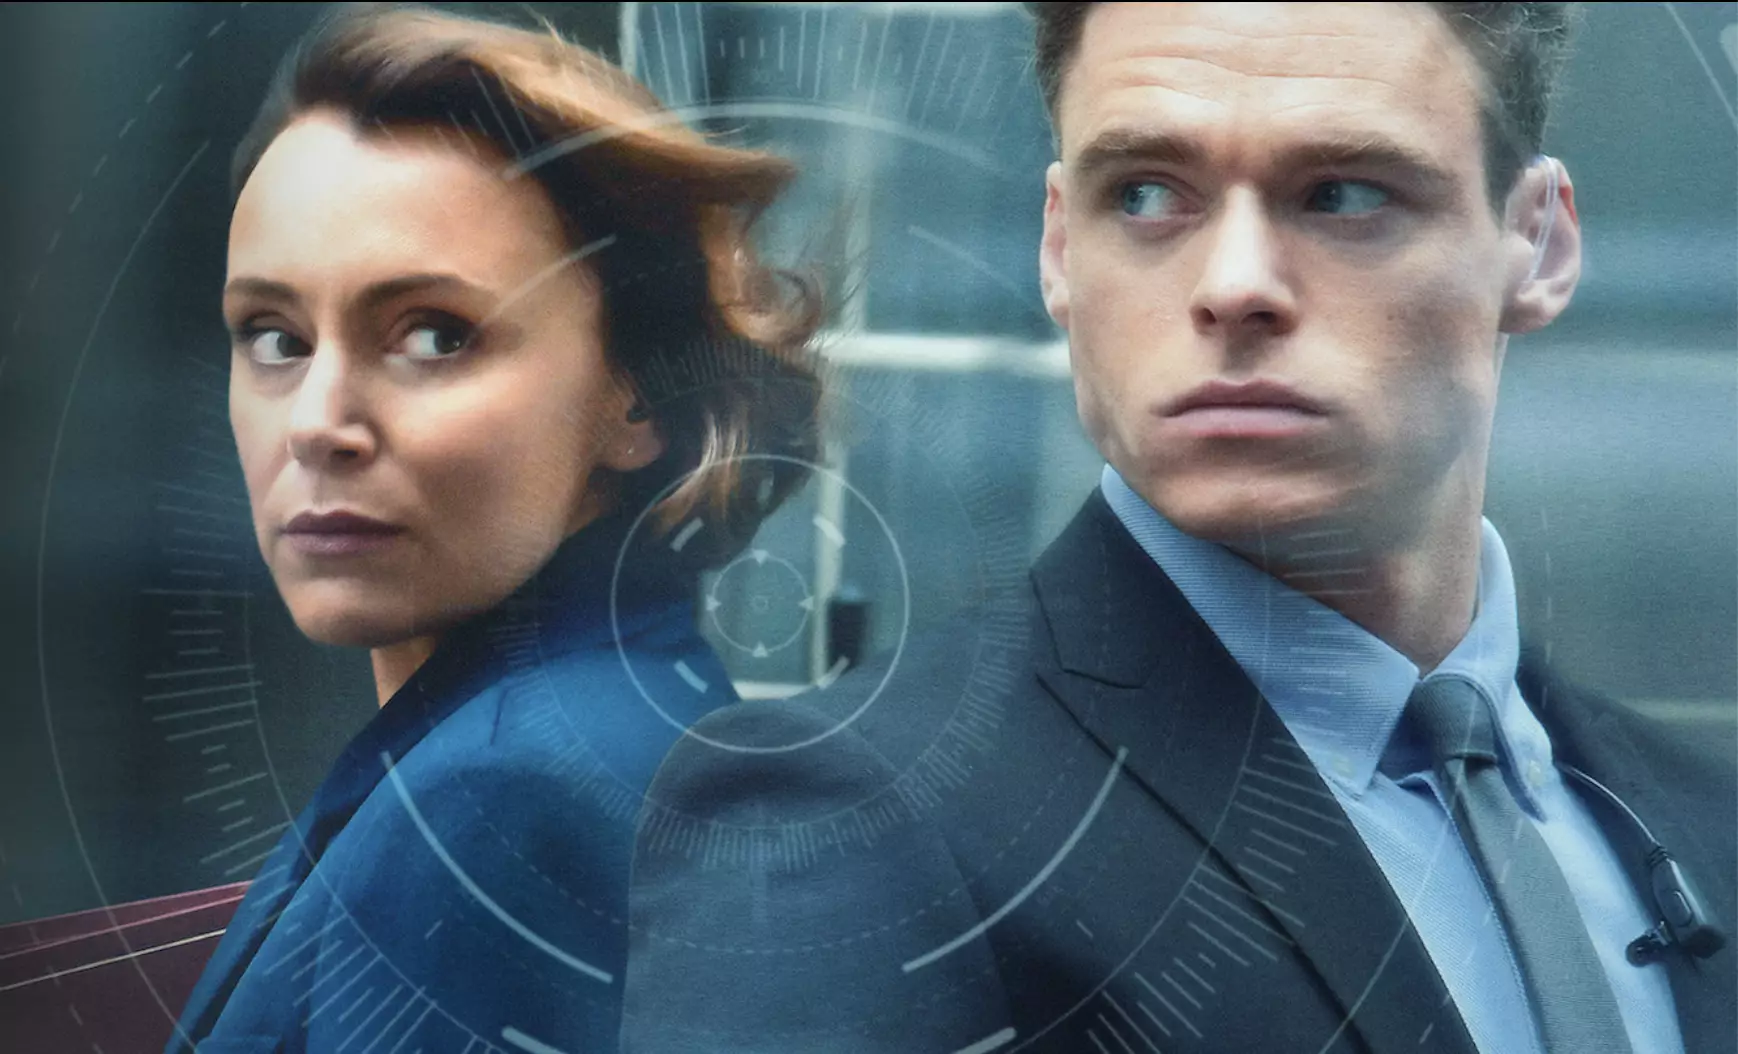 Bodyguard is a crime drama from the BBC, now streaming on Netflix '